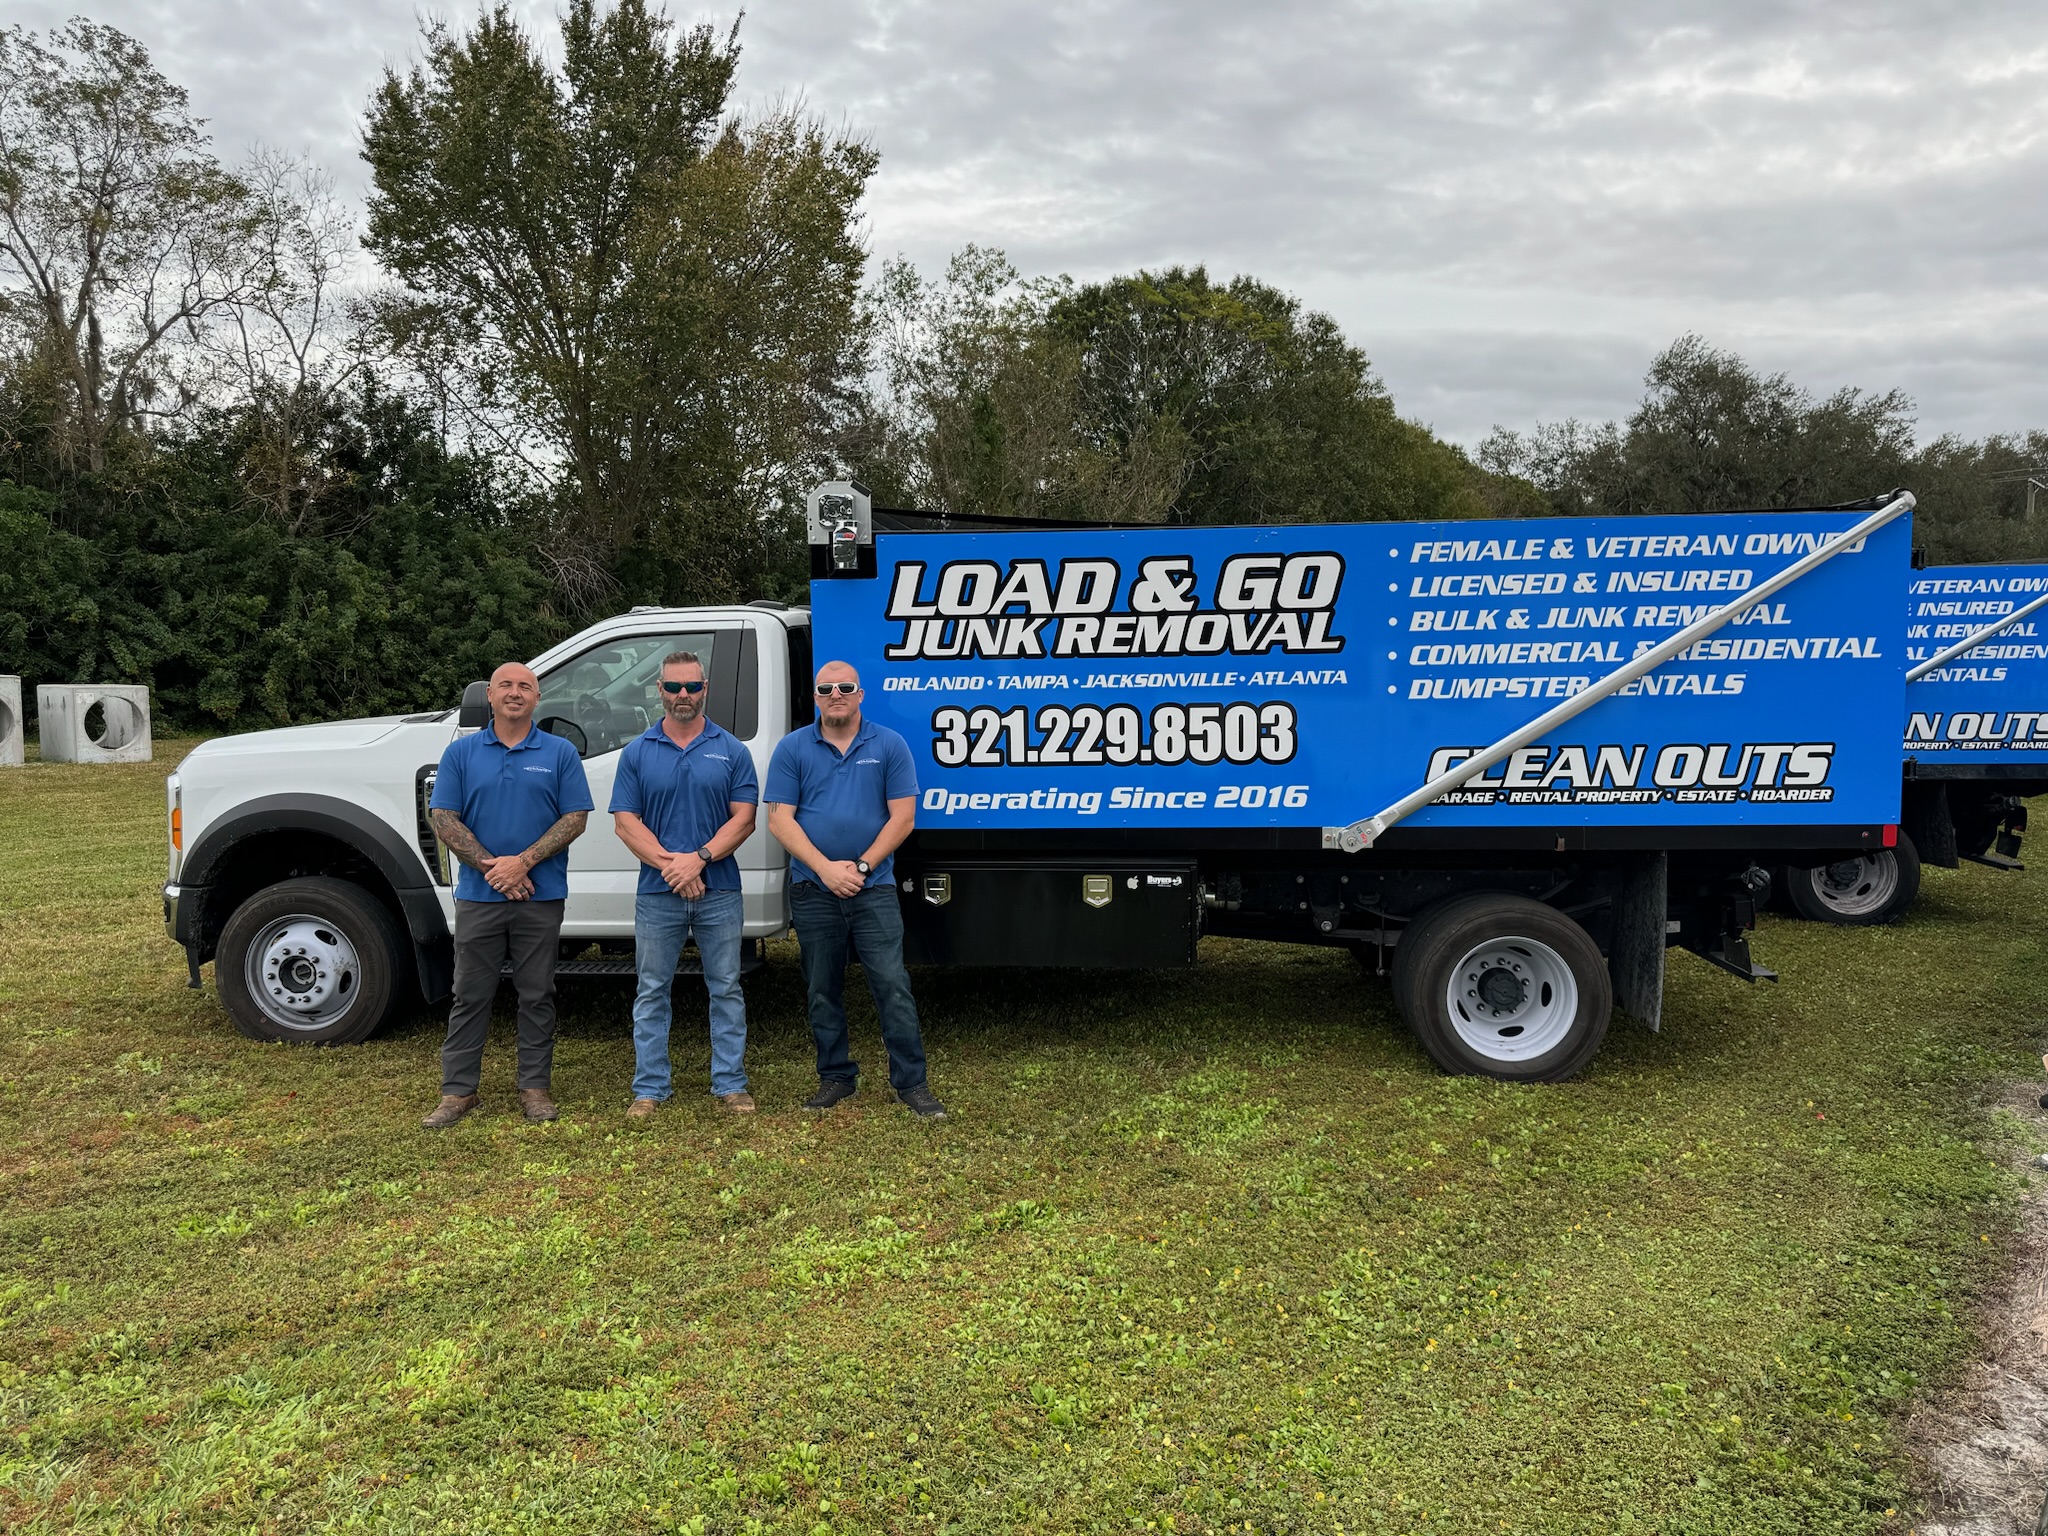 About Load & Go Dumpsters, Inc.